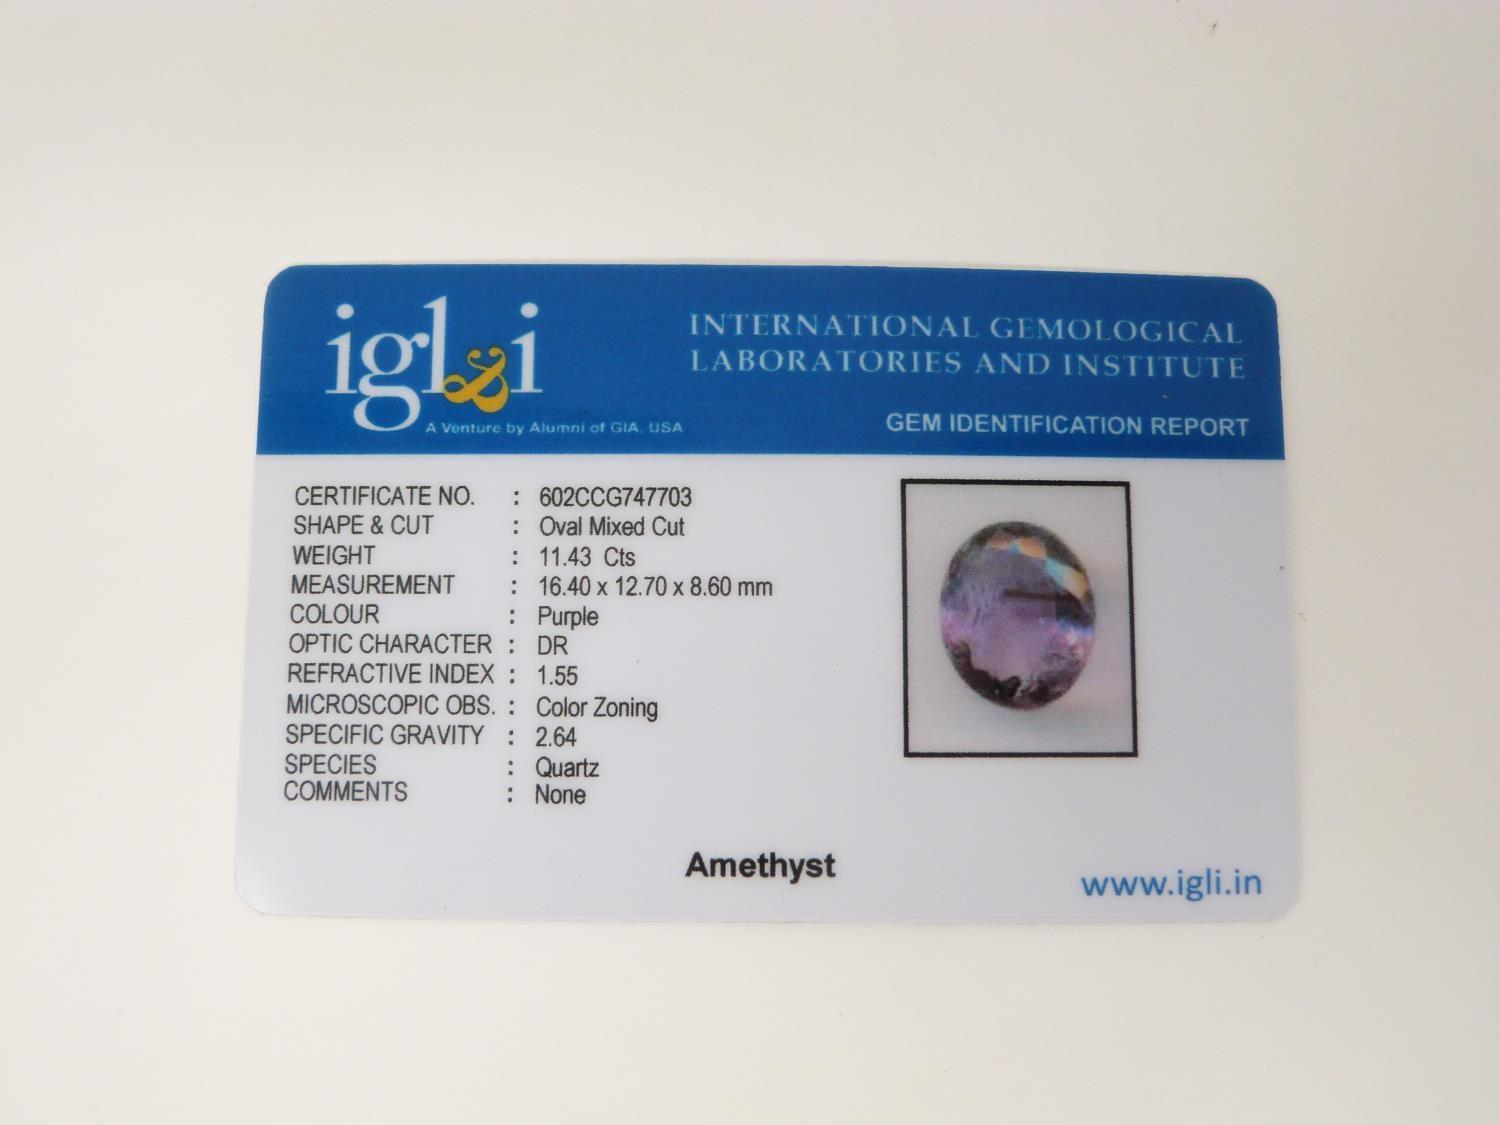 An IGL & I (International Gemological Laboratories and Institute) certificated oval mixed cut - Image 14 of 14